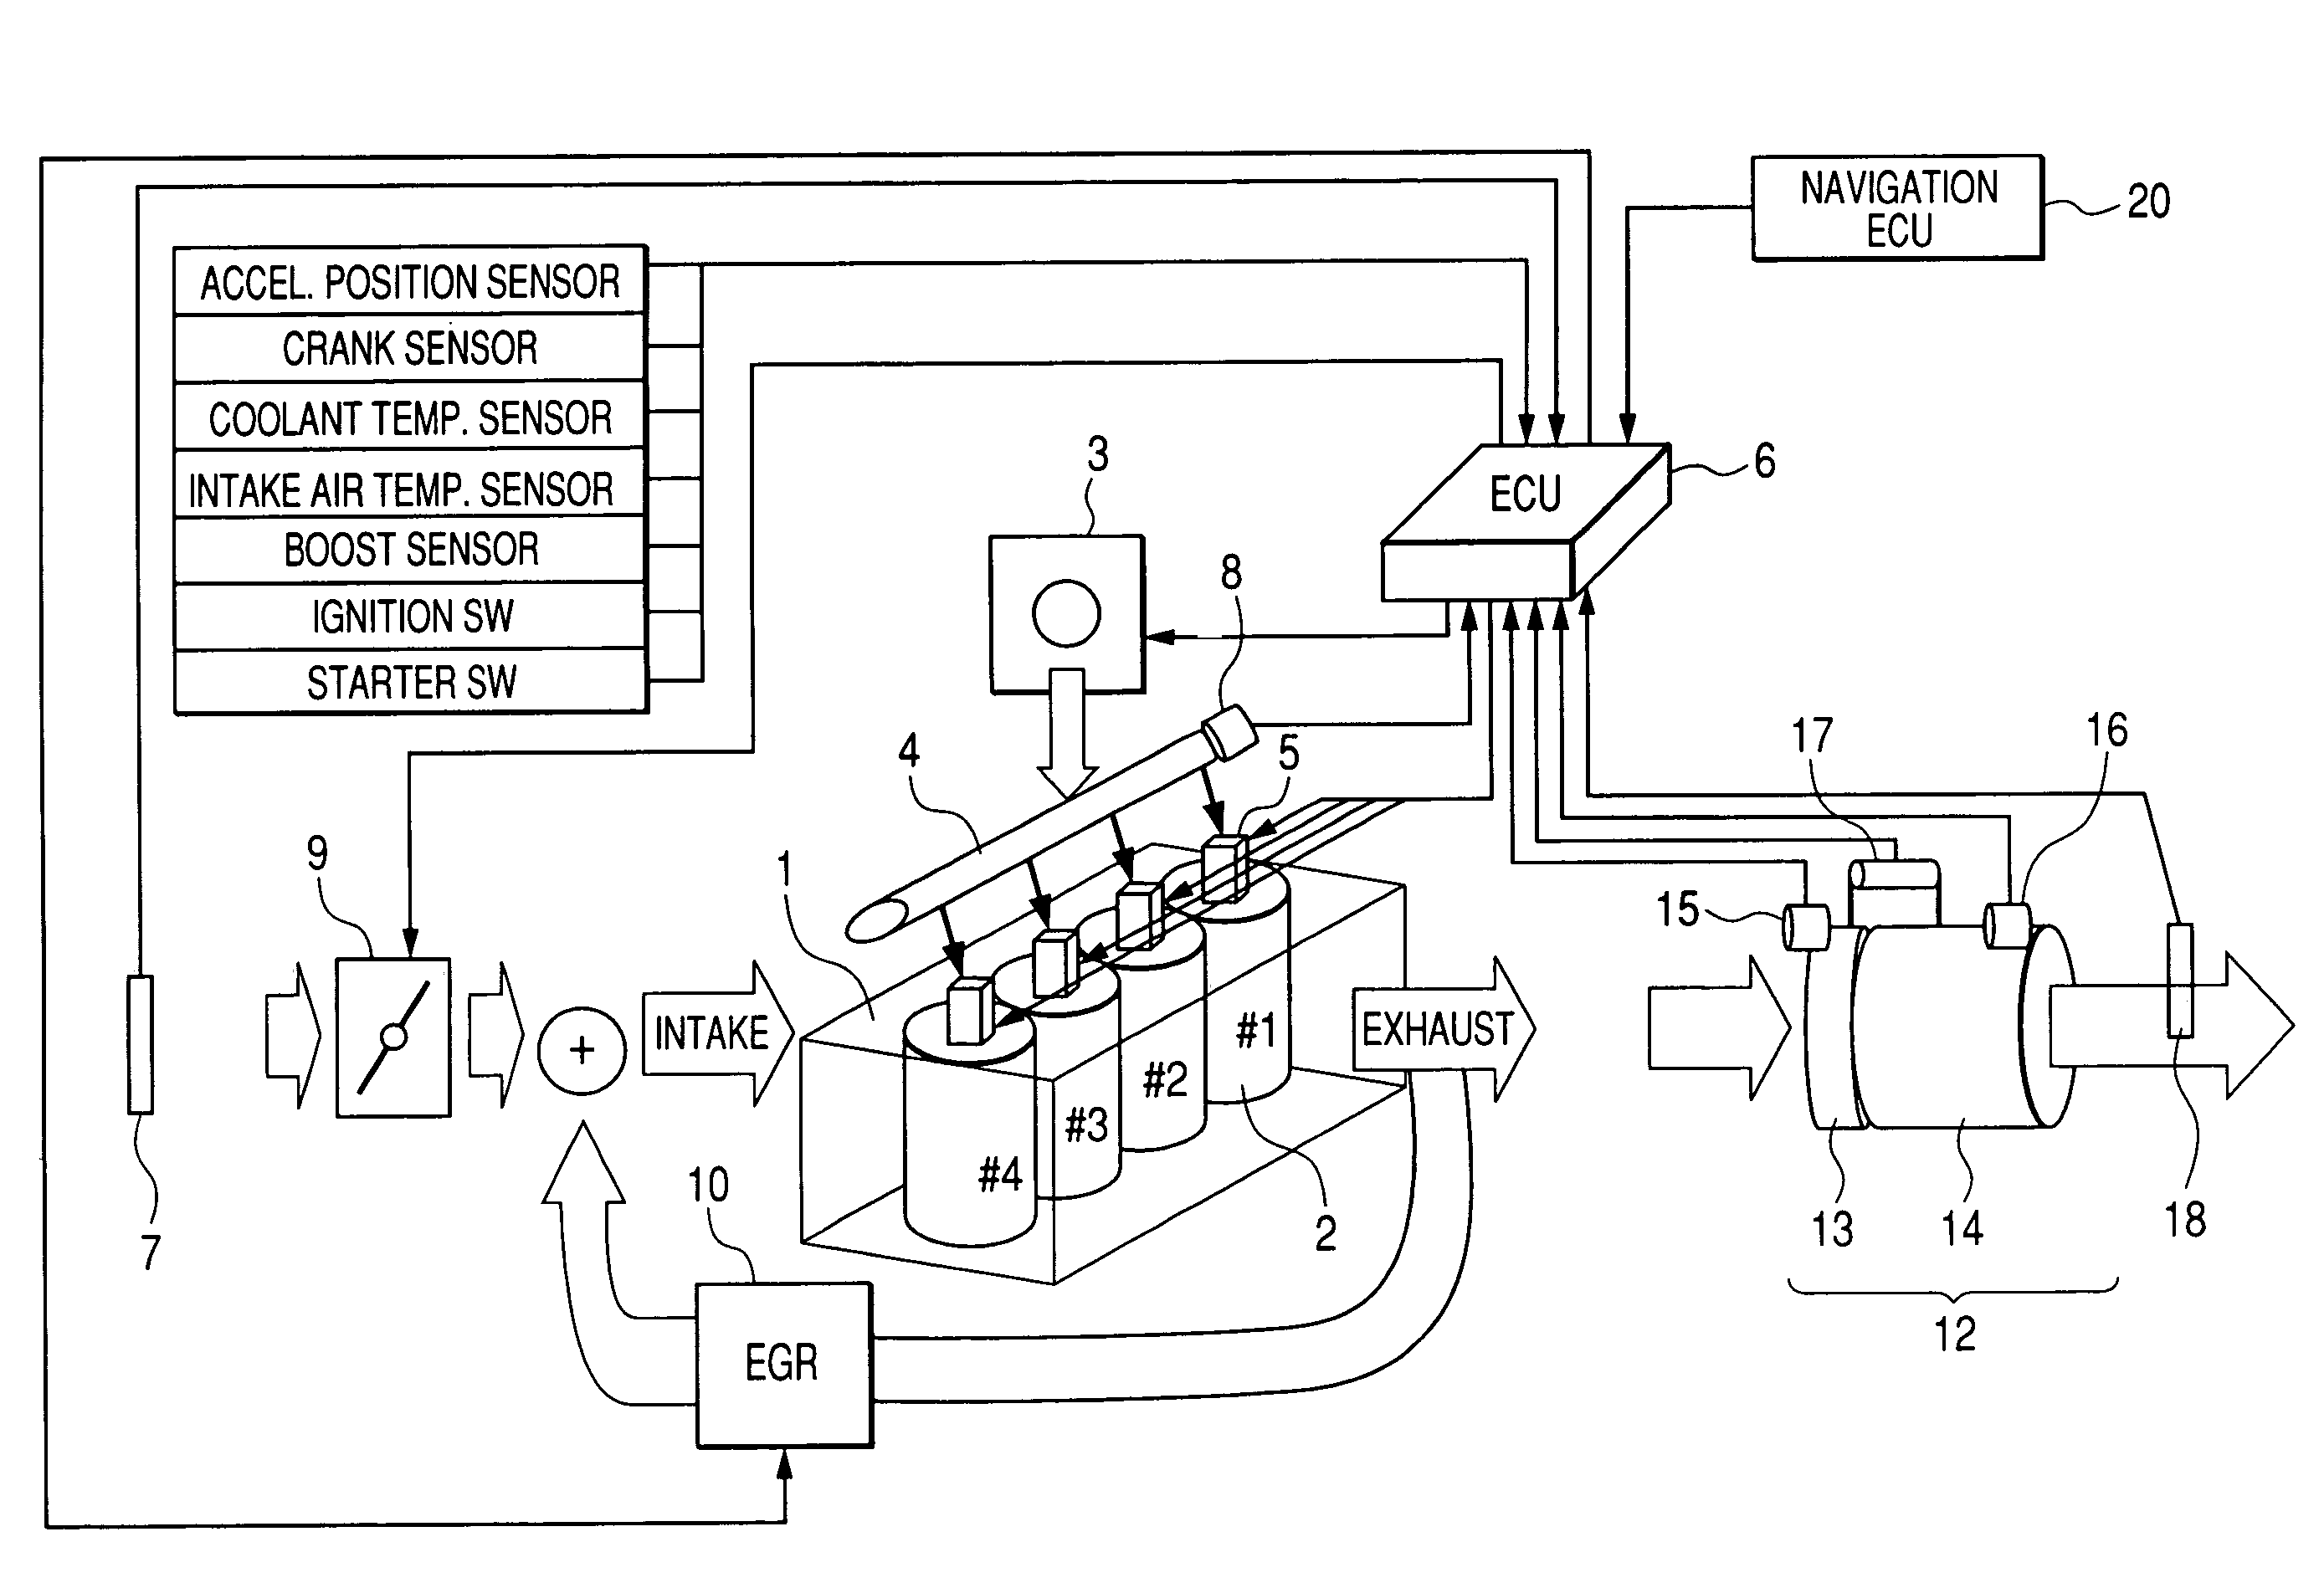 Fuel injection control system designed to eliminate overlap between multiple fuel injection events